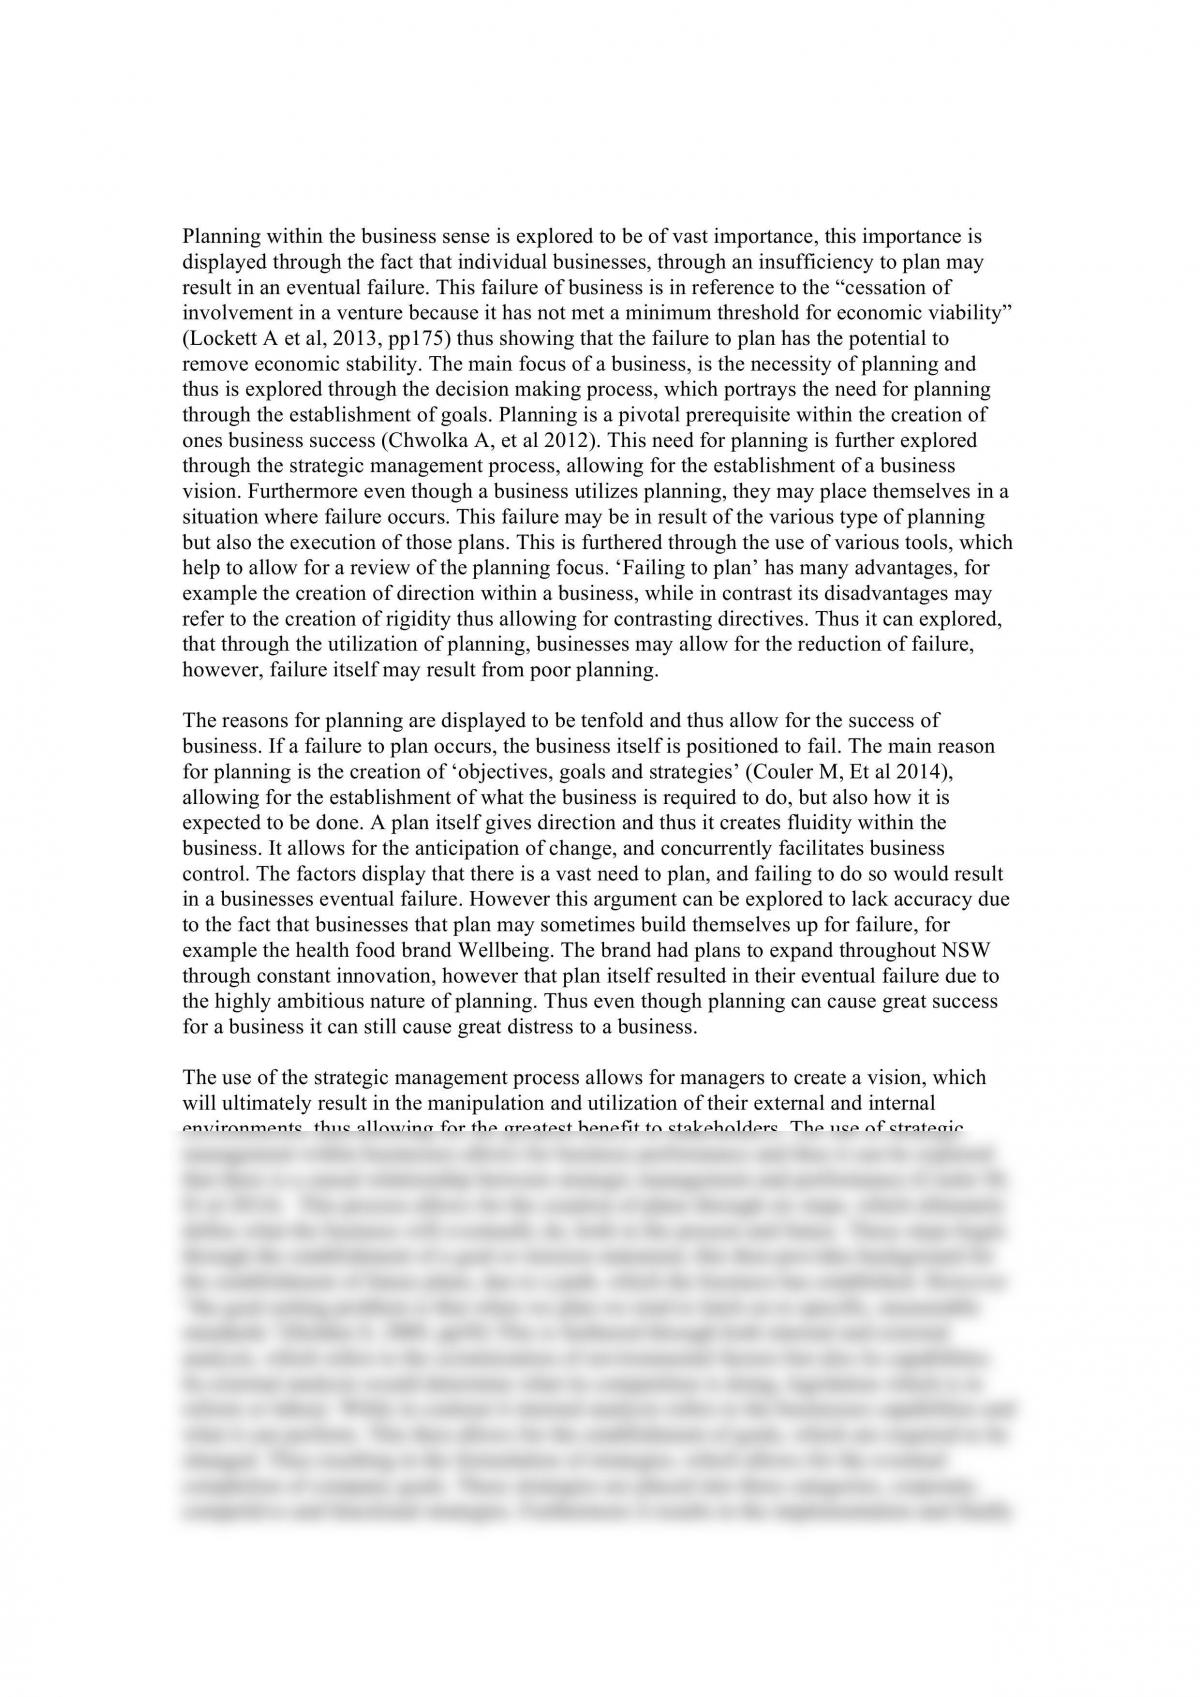 BBA102 Assignment 2 - Page 1